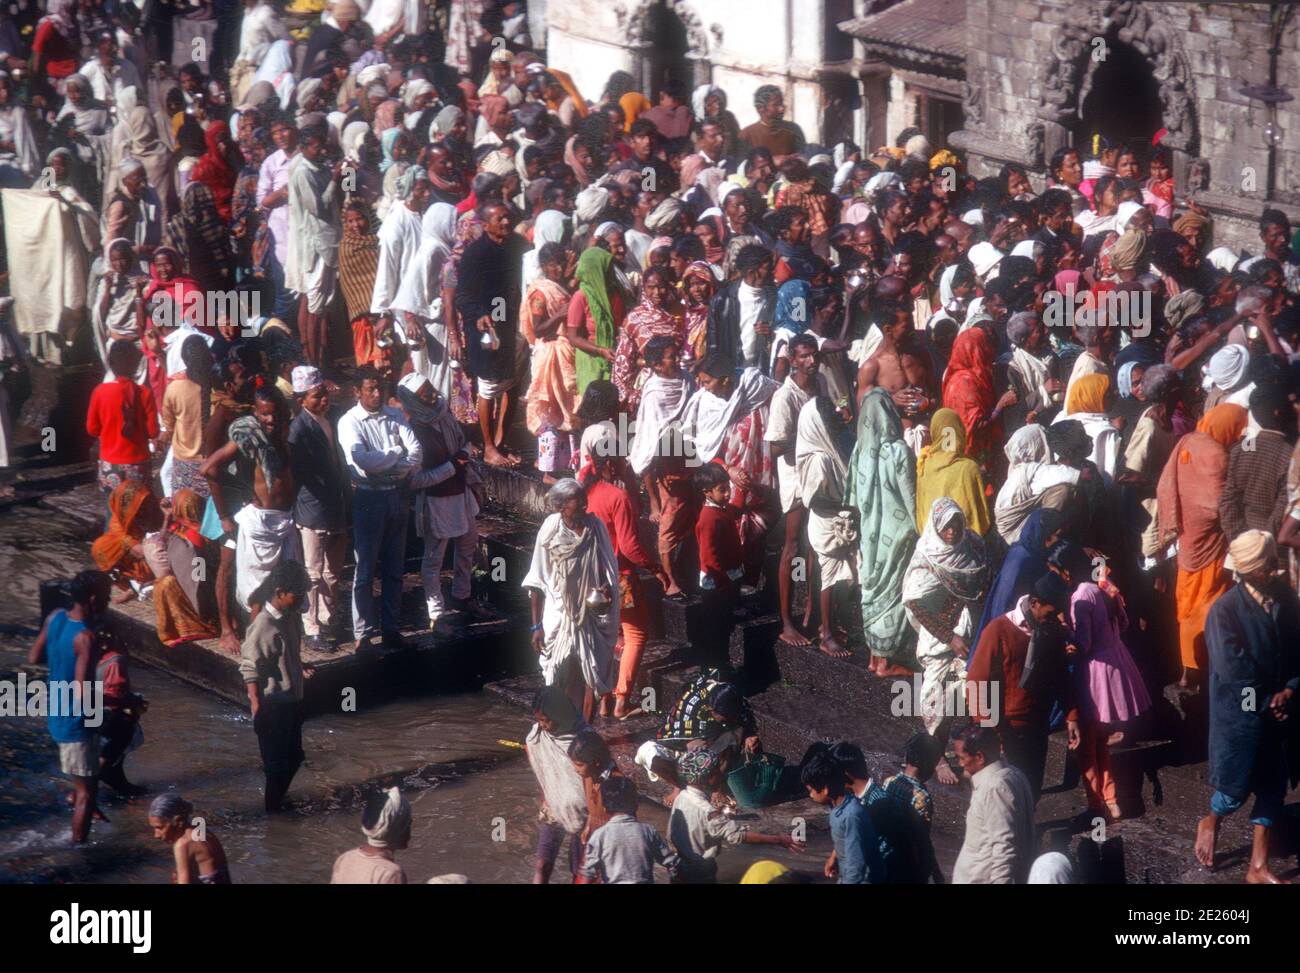 Pashupatinath Temple is a Hindi Temple dedicated to the Lord Shiva and is one of the four most important religious sites in Asia for devotees of Shiva. It was created in the 5th century and is situated on the banks of the Bagmati River. Photo taken in 1974. It is now a UNESCO World Heritage Site. Stock Photo